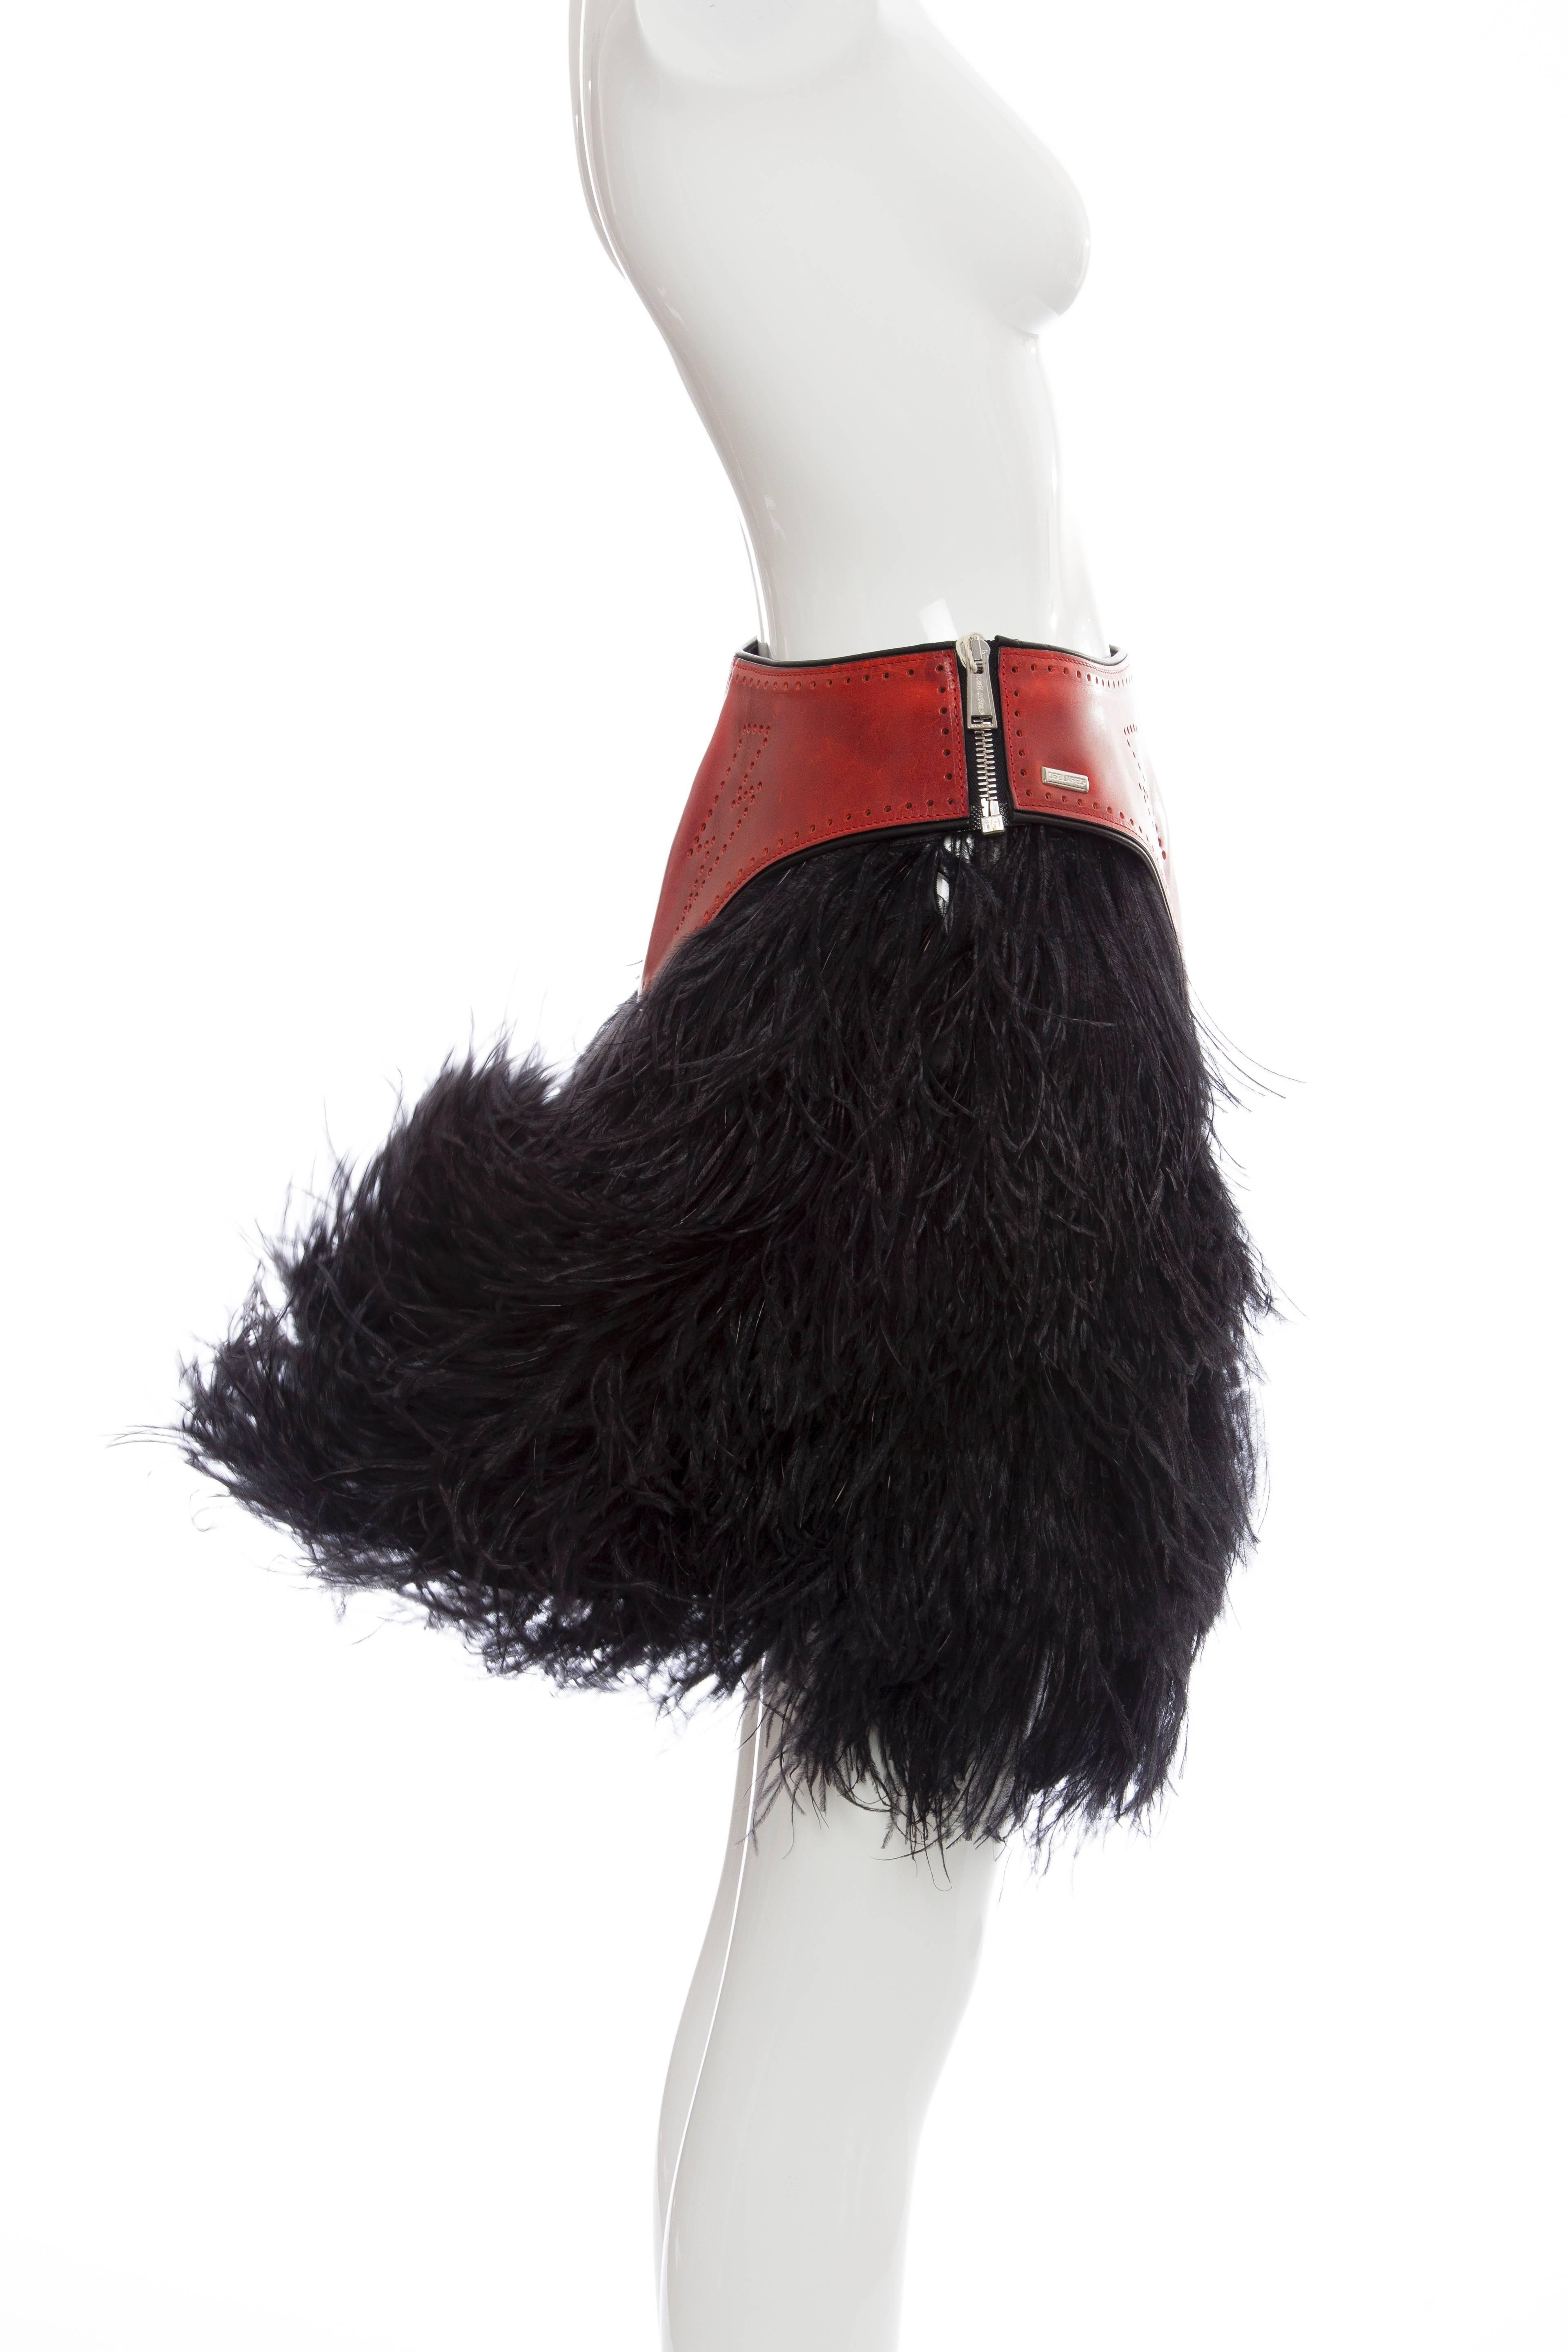 Black Dsquared2 Ostrich Feather Skirt With Red Perforated Leather Waist, Fall 2008